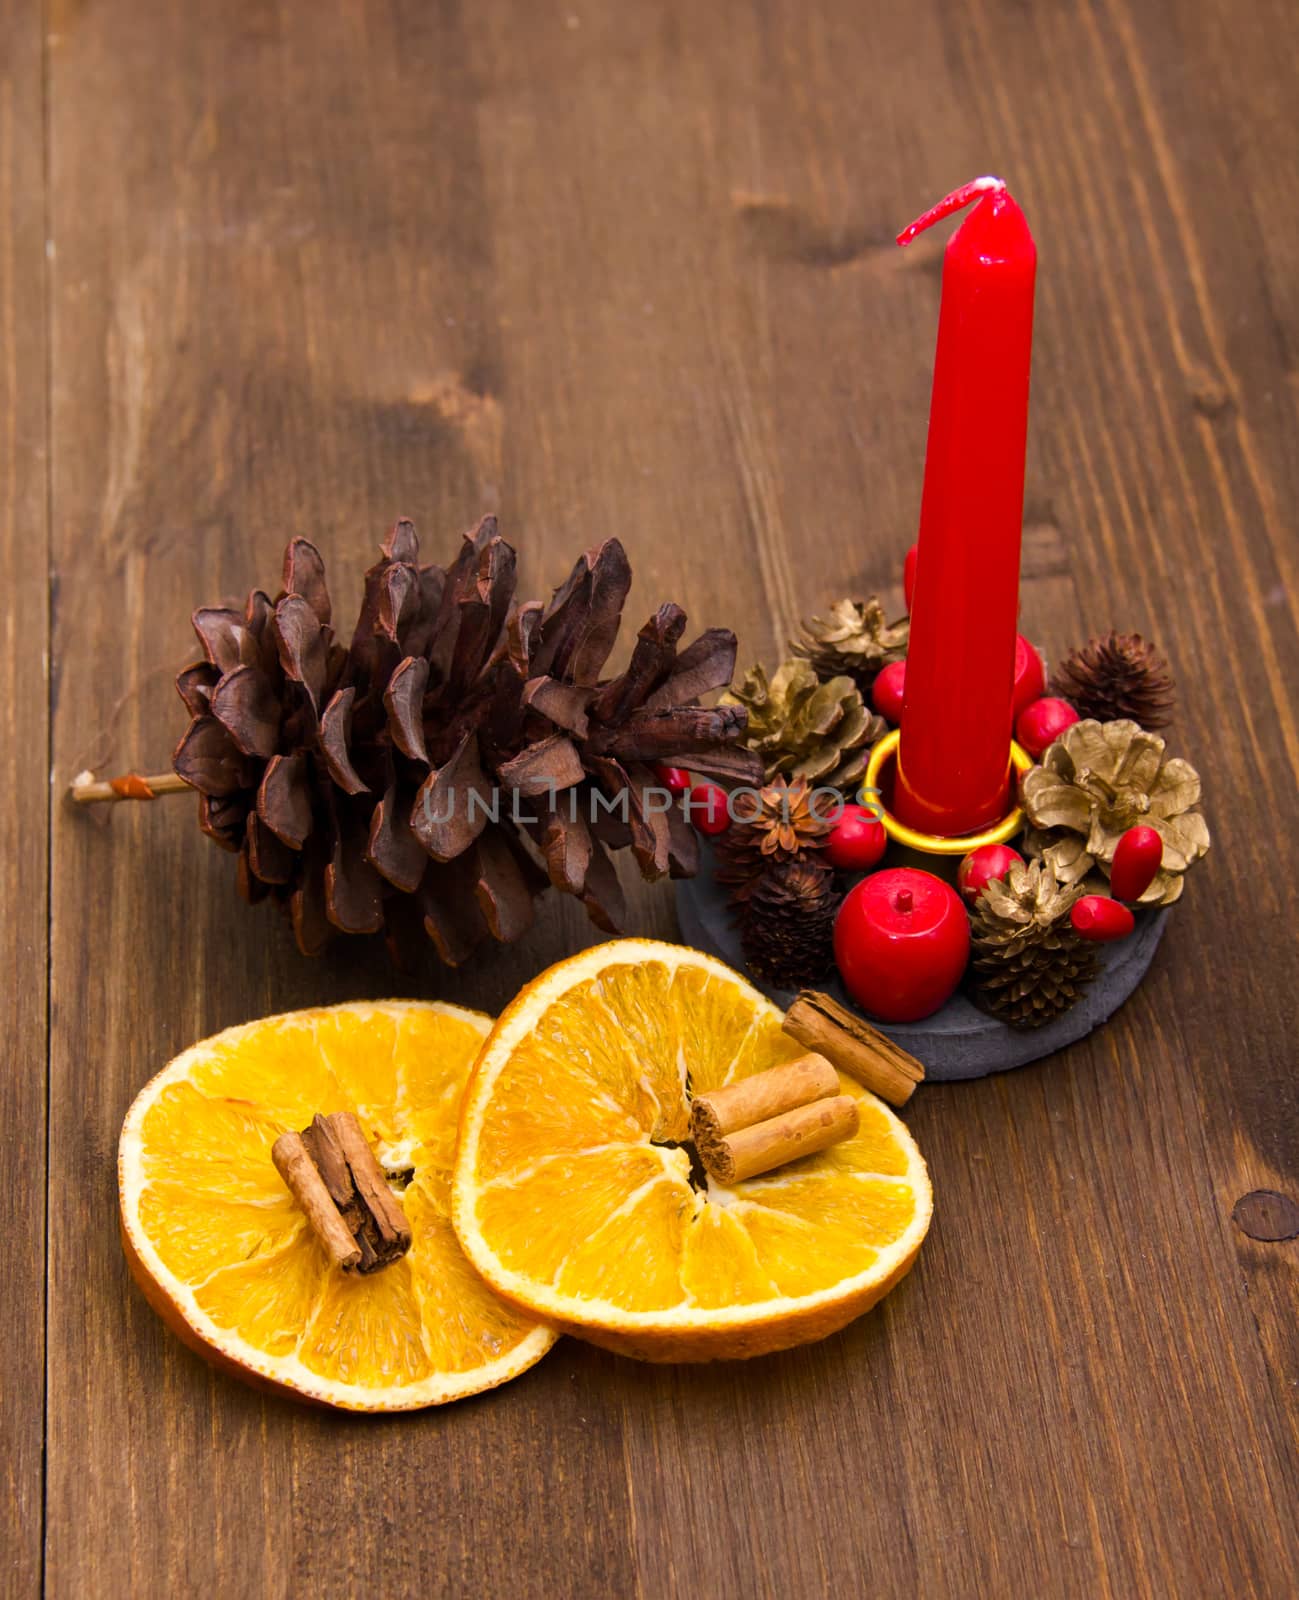 Candle with Christmas decorations by spafra